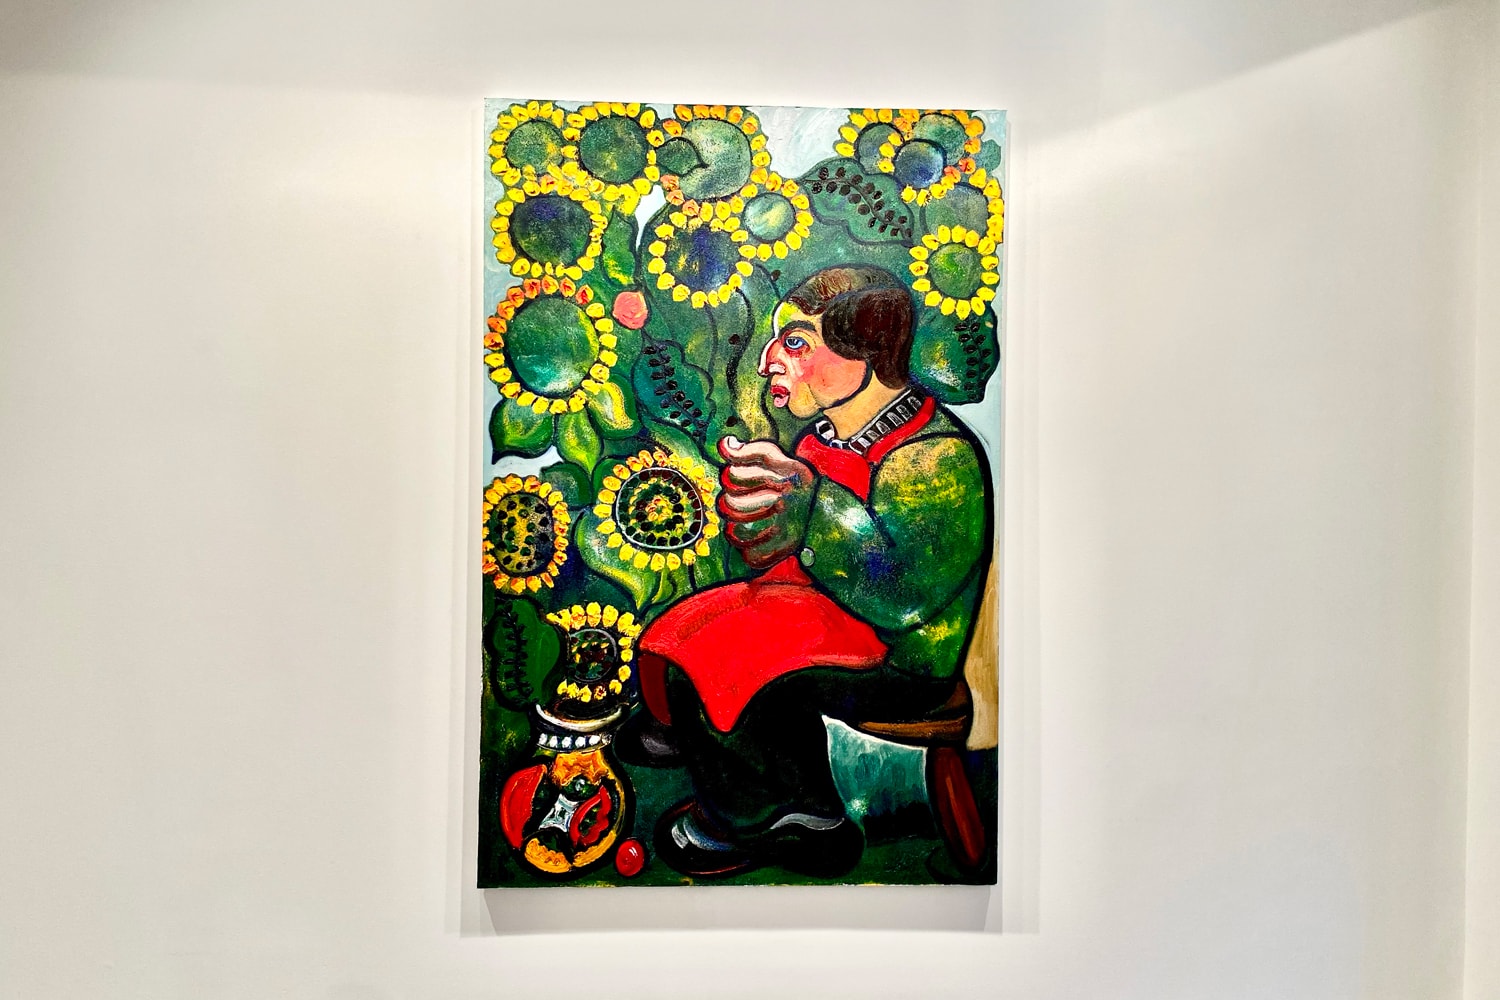 zurab tsereteli surrounded by flowers padre gallery exhibition